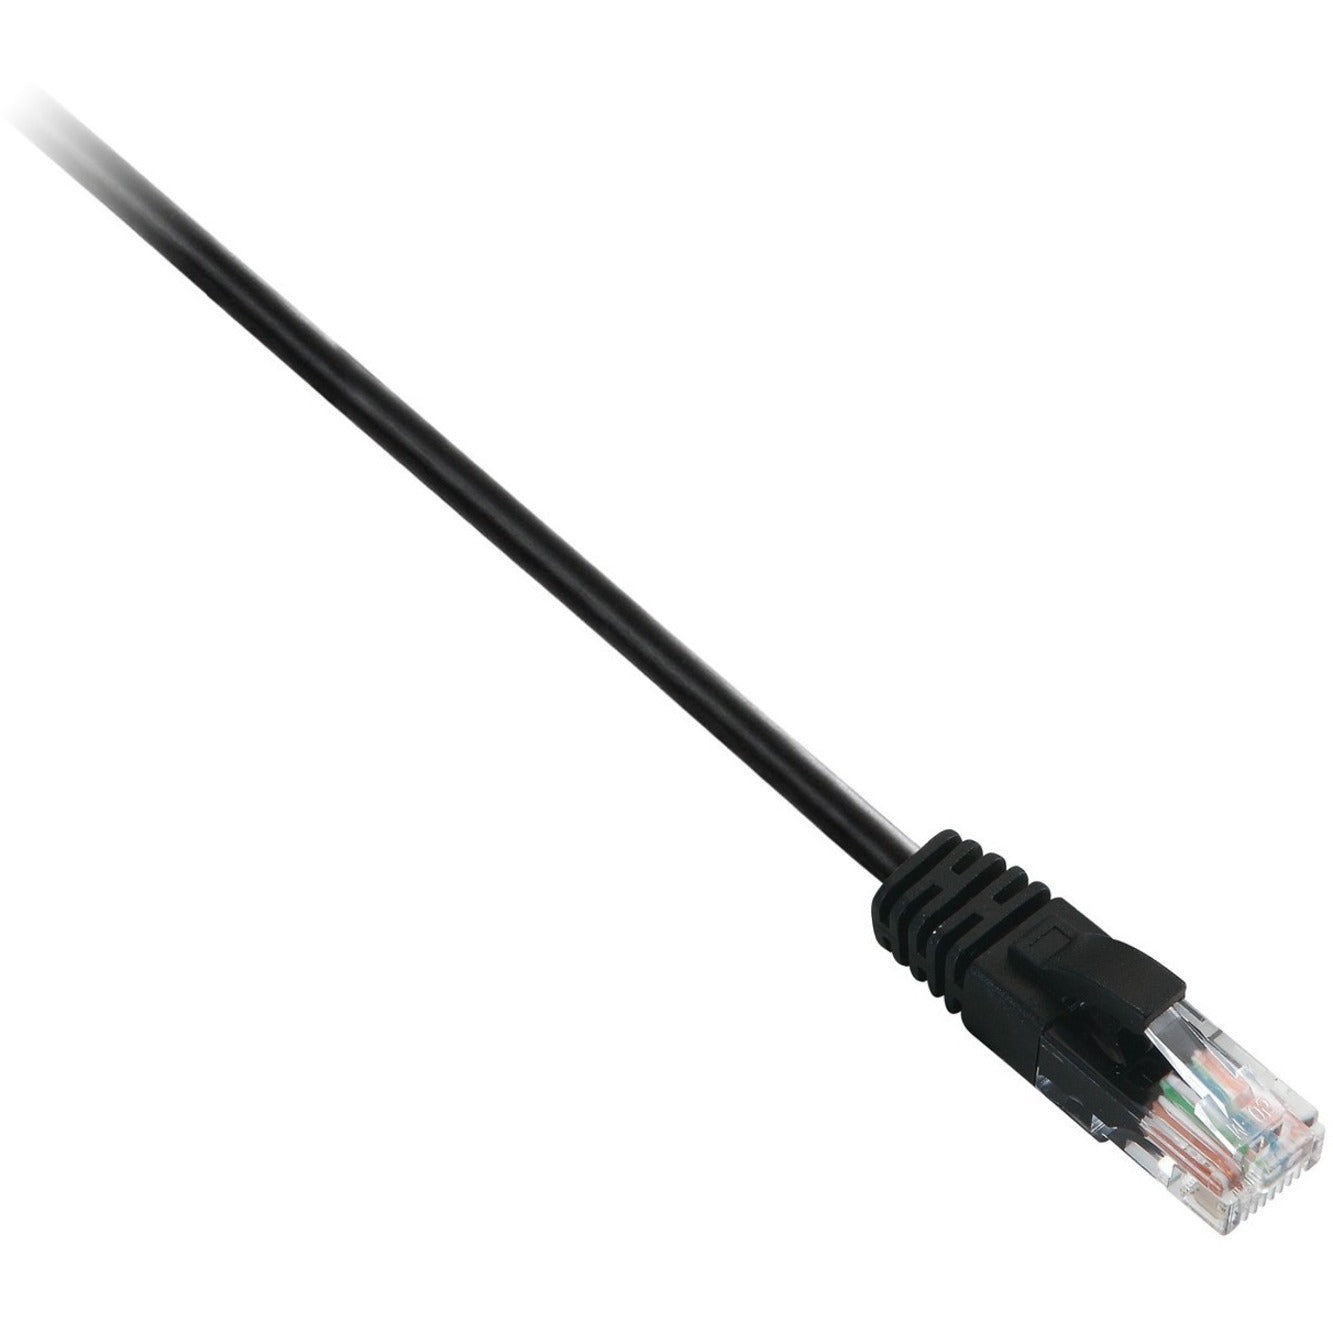 V7 CAT5UTP-01F-BLK Black Cat5e Unshielded (UTP) Cable RJ45 Male to RJ45 Male 0.3m 1ft, EMI/RF Protection, Strain Relief, Molded, Locking Latch, Snagless Boot, Noise Reducing